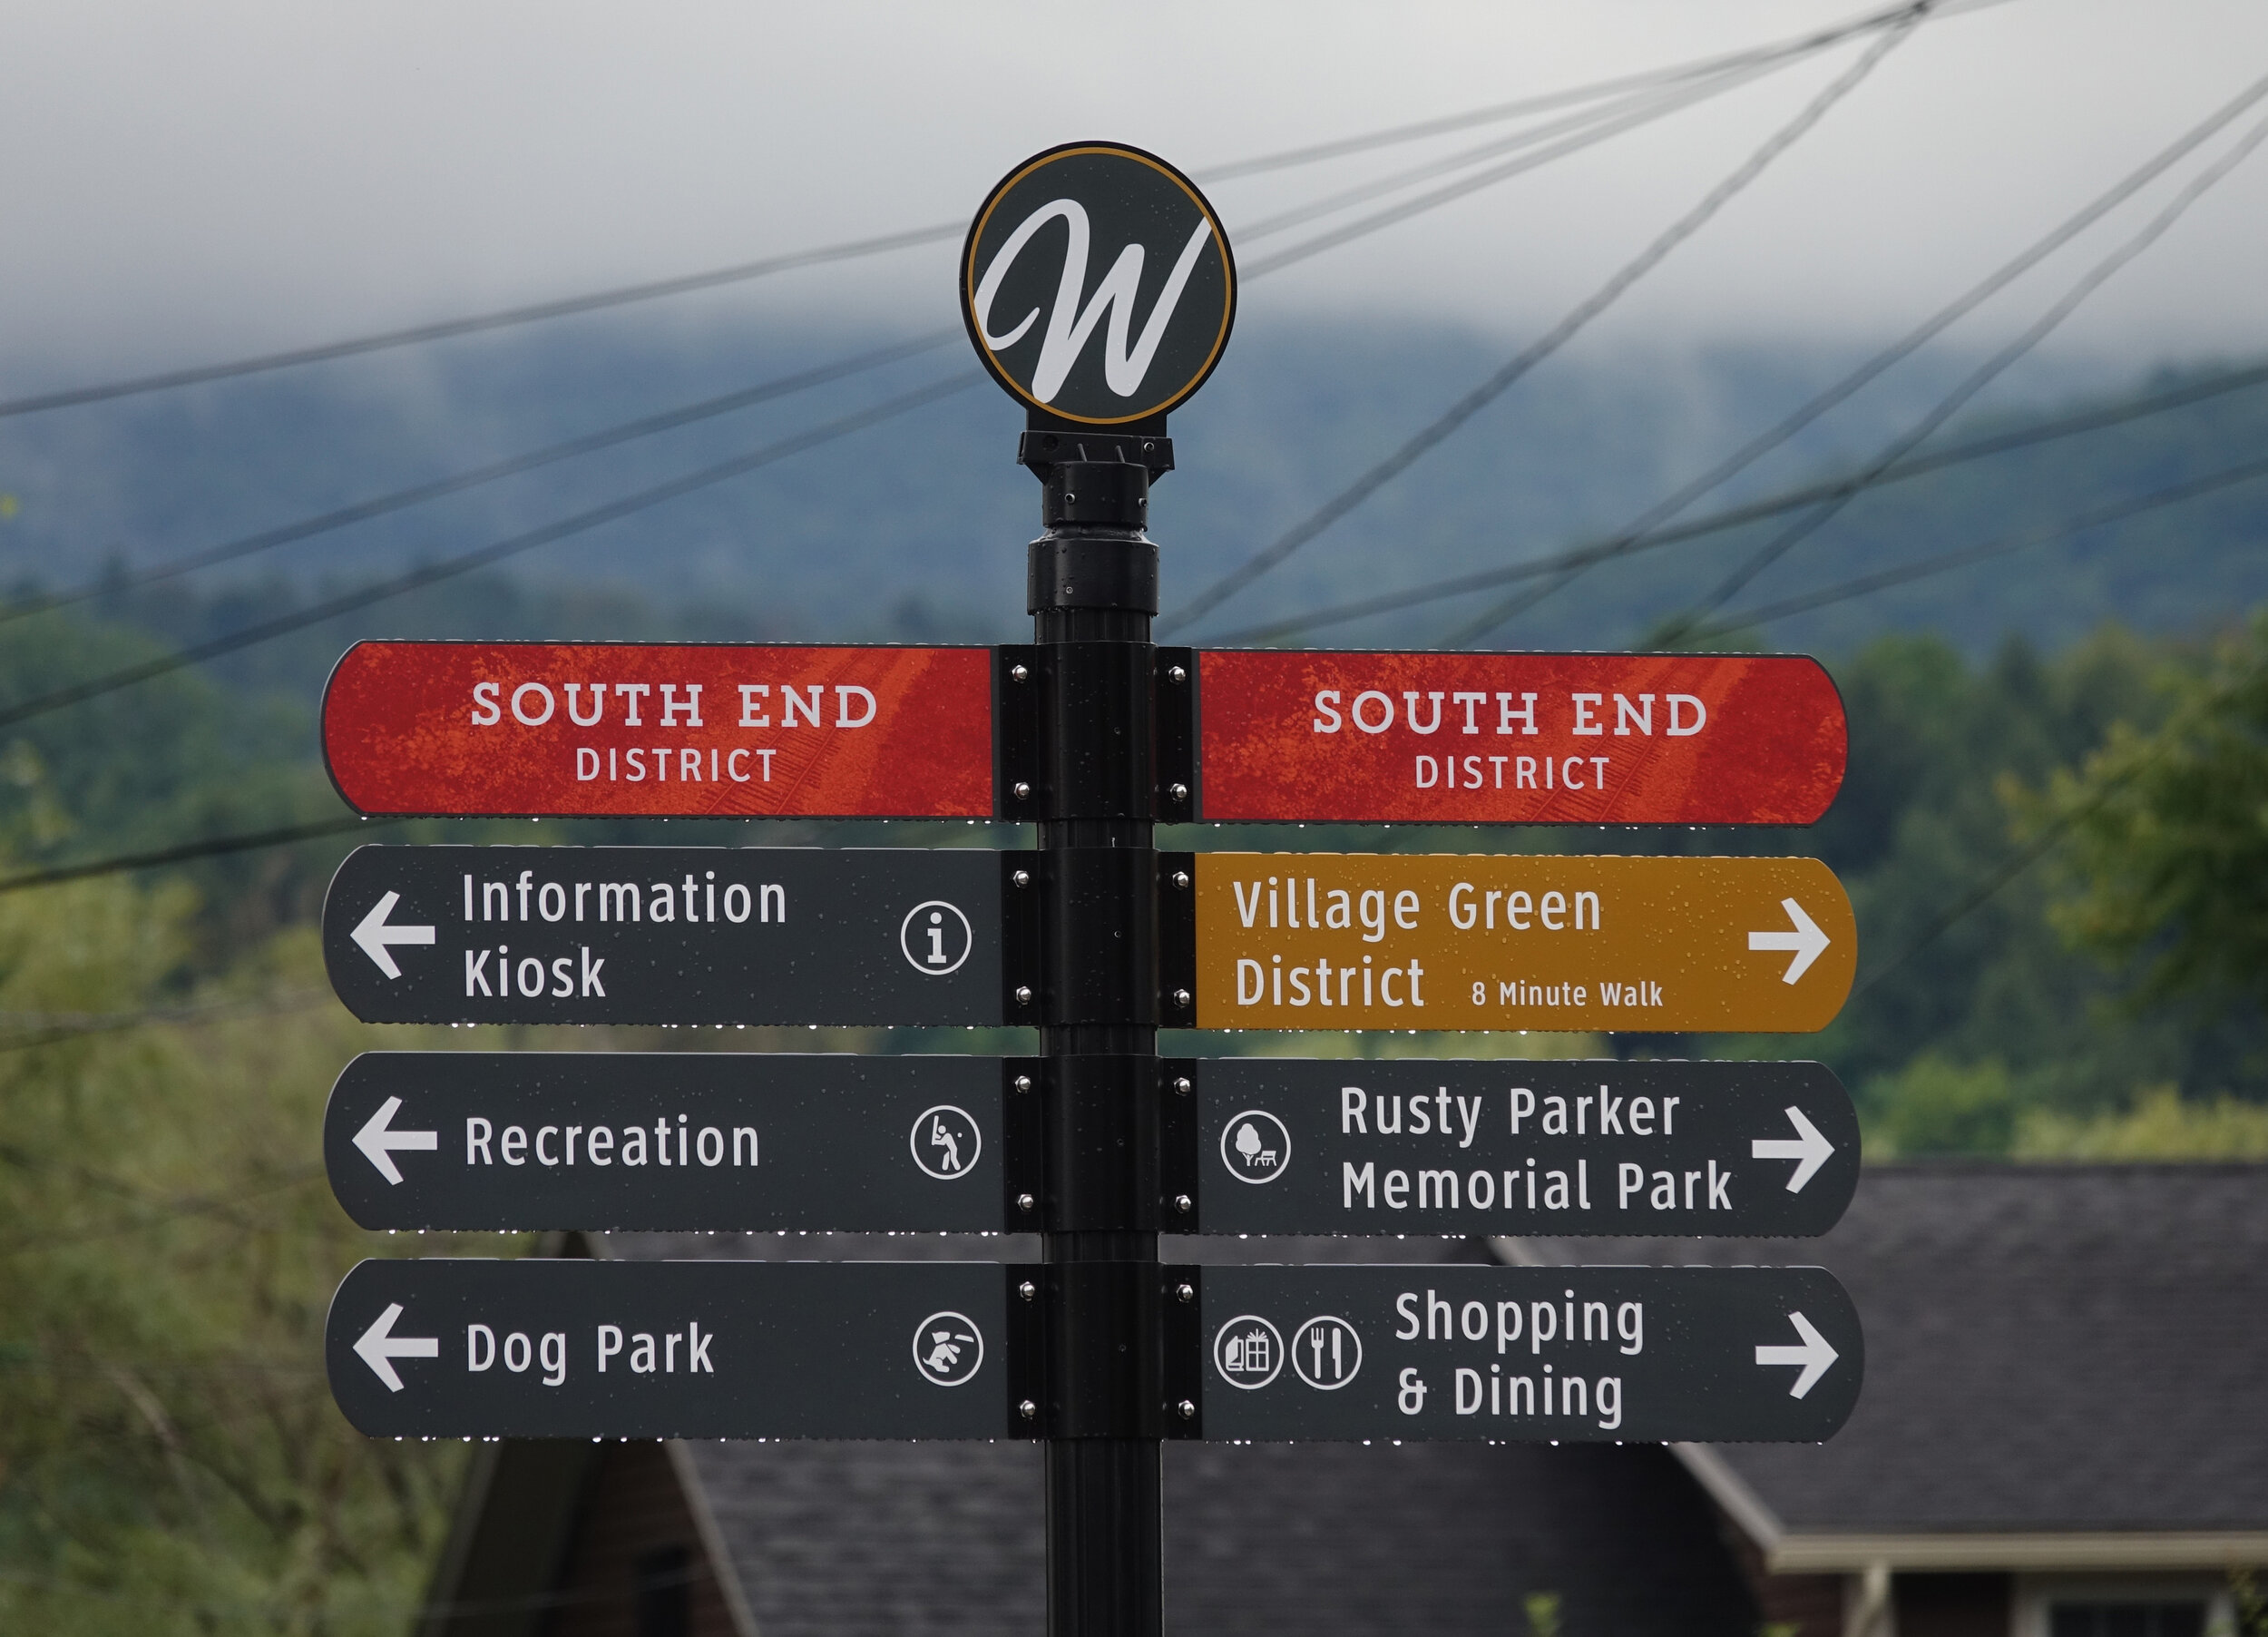   New wayfinding signs note sections of downtown, parks, and activities like shopping and dining. The markers on South Main Street post will correspond with a nearby kiosk. Photo by Gordon Miller  